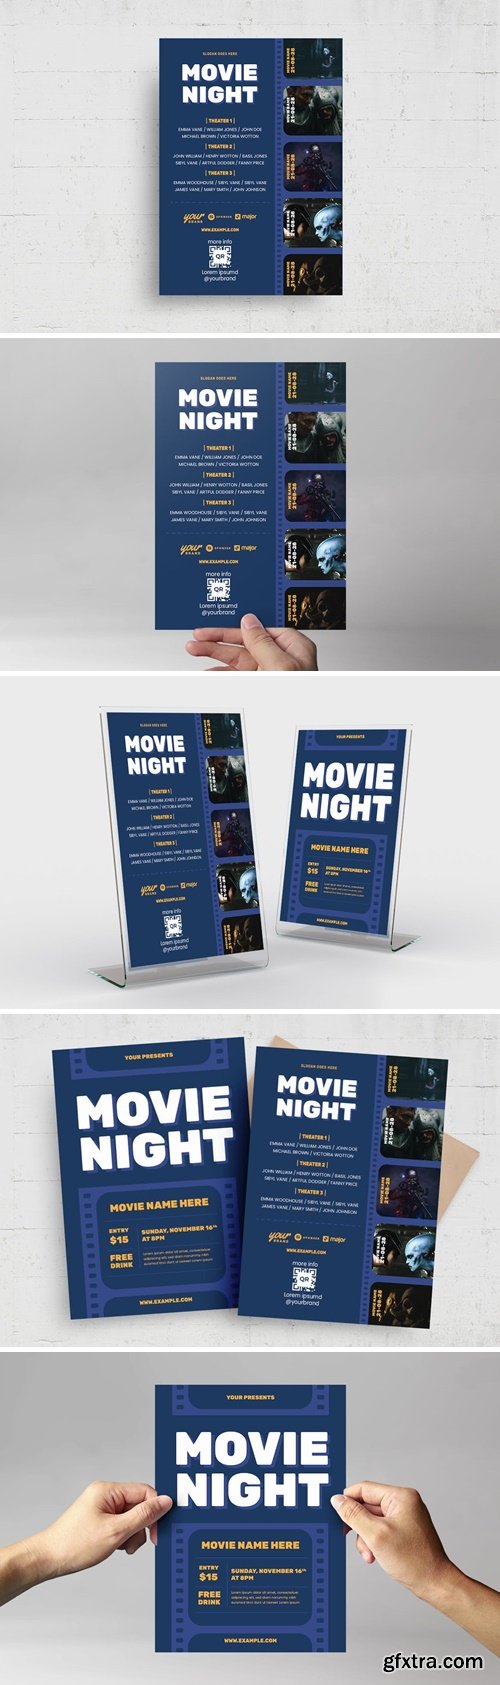 Movie Night Flyer Template CQD85DN